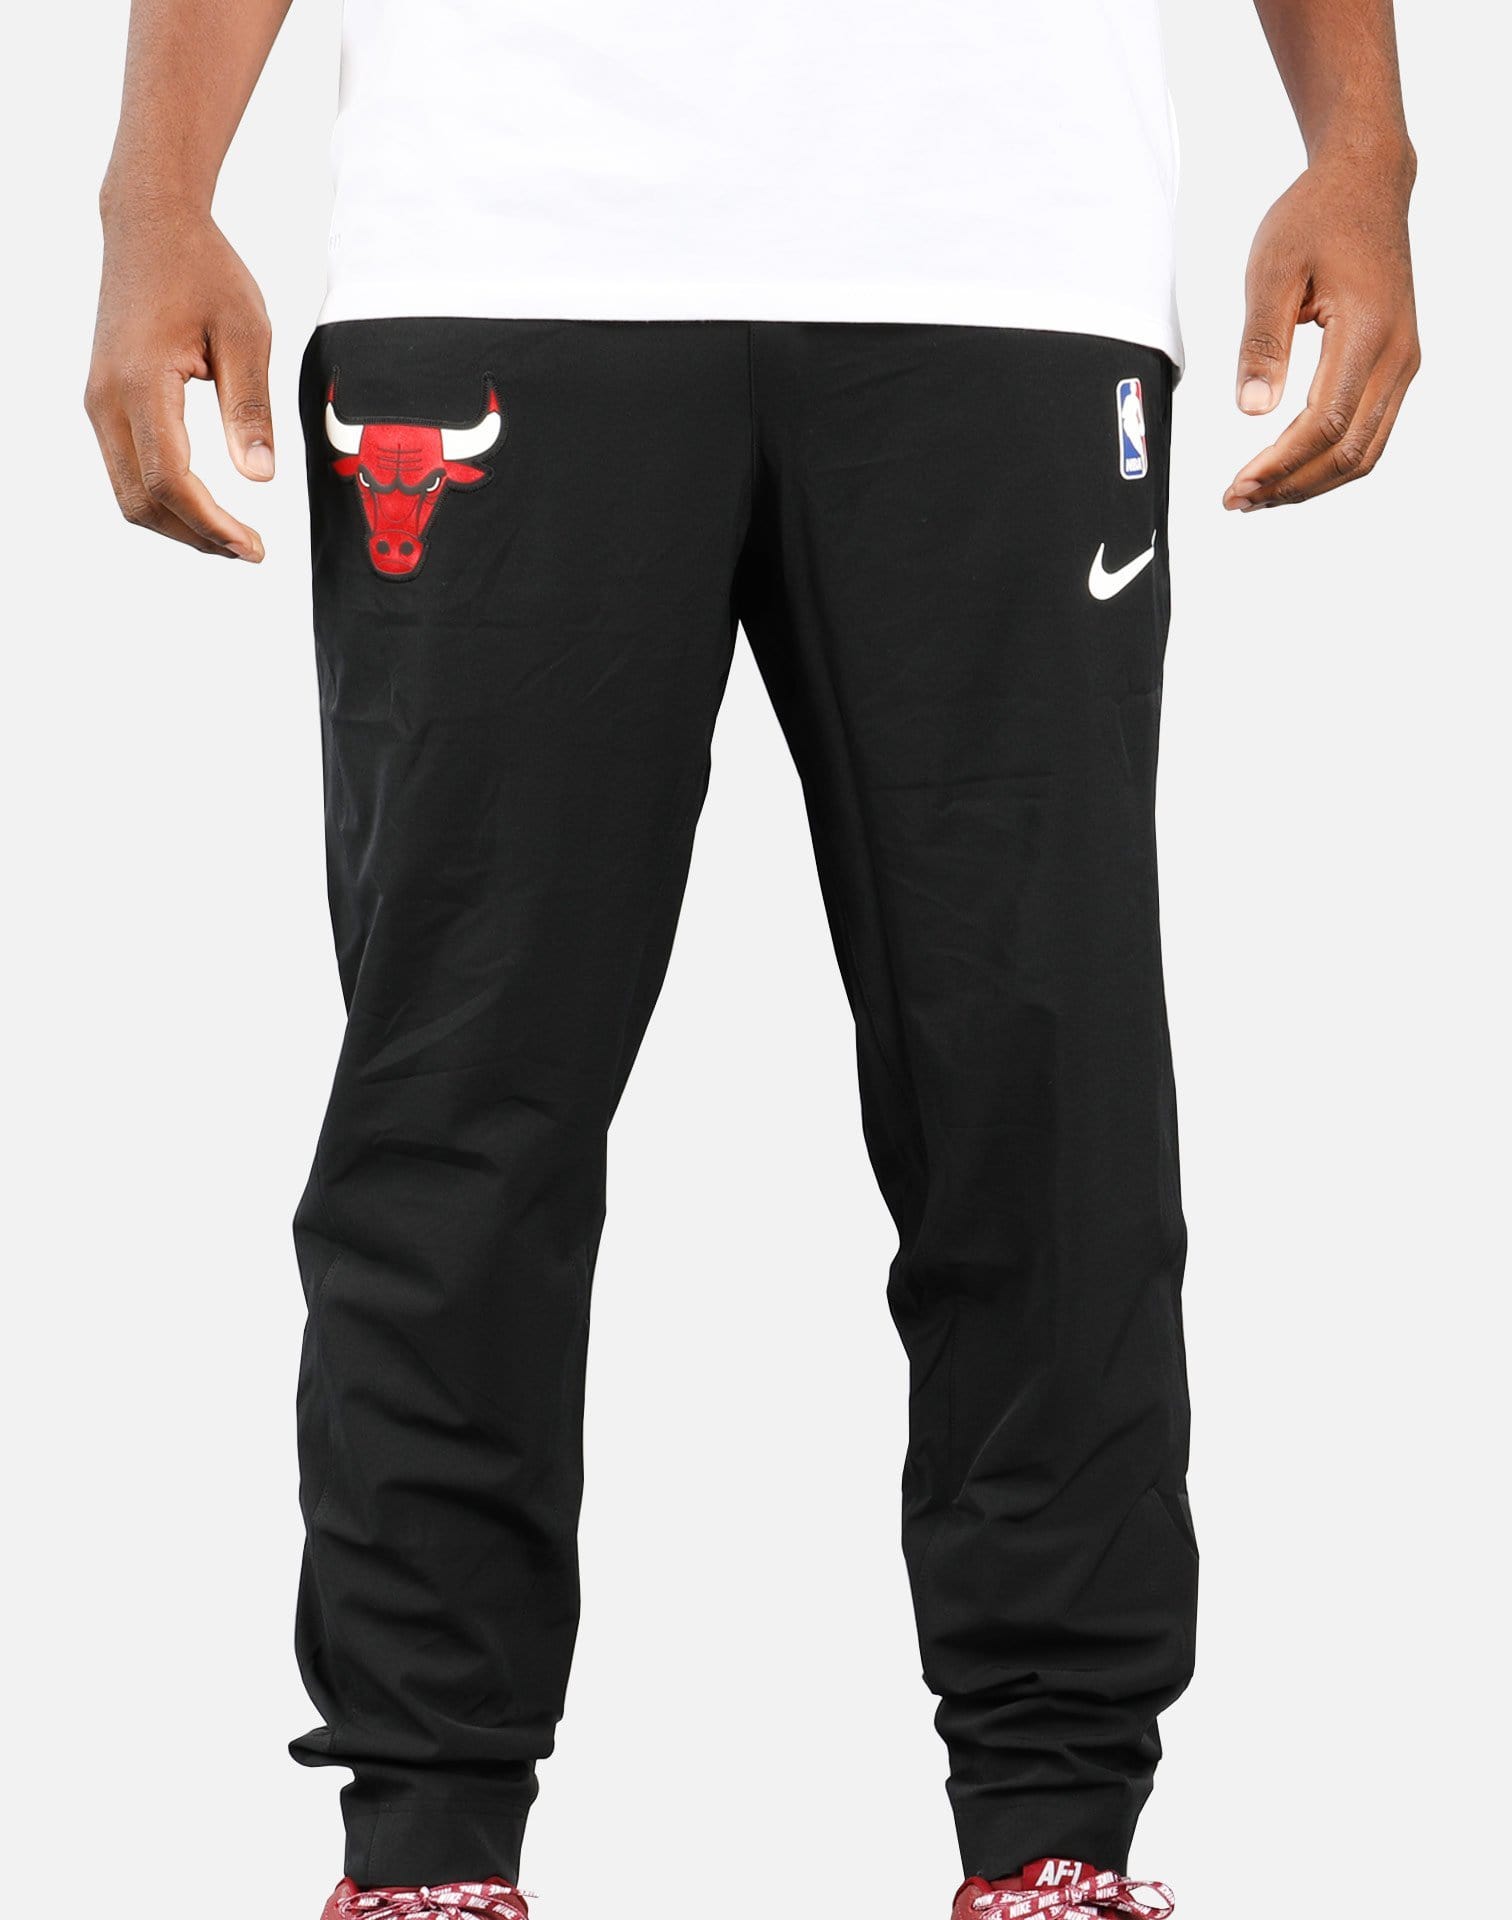 Showtime Football Integrated White Pant